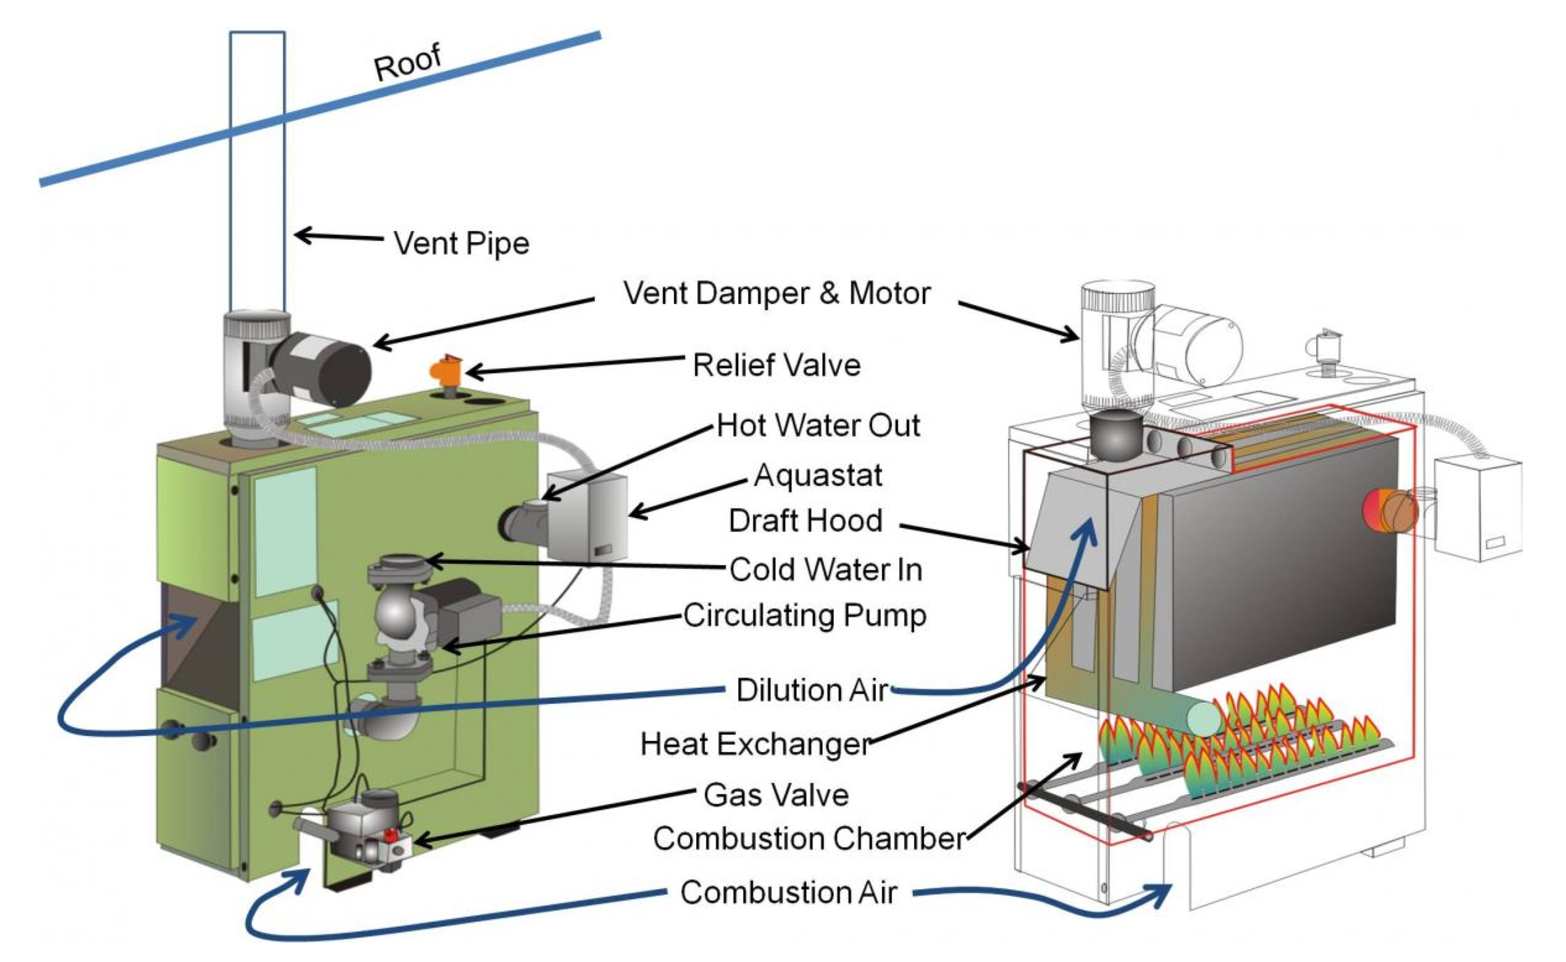 Operation of Hot-Water Boilers